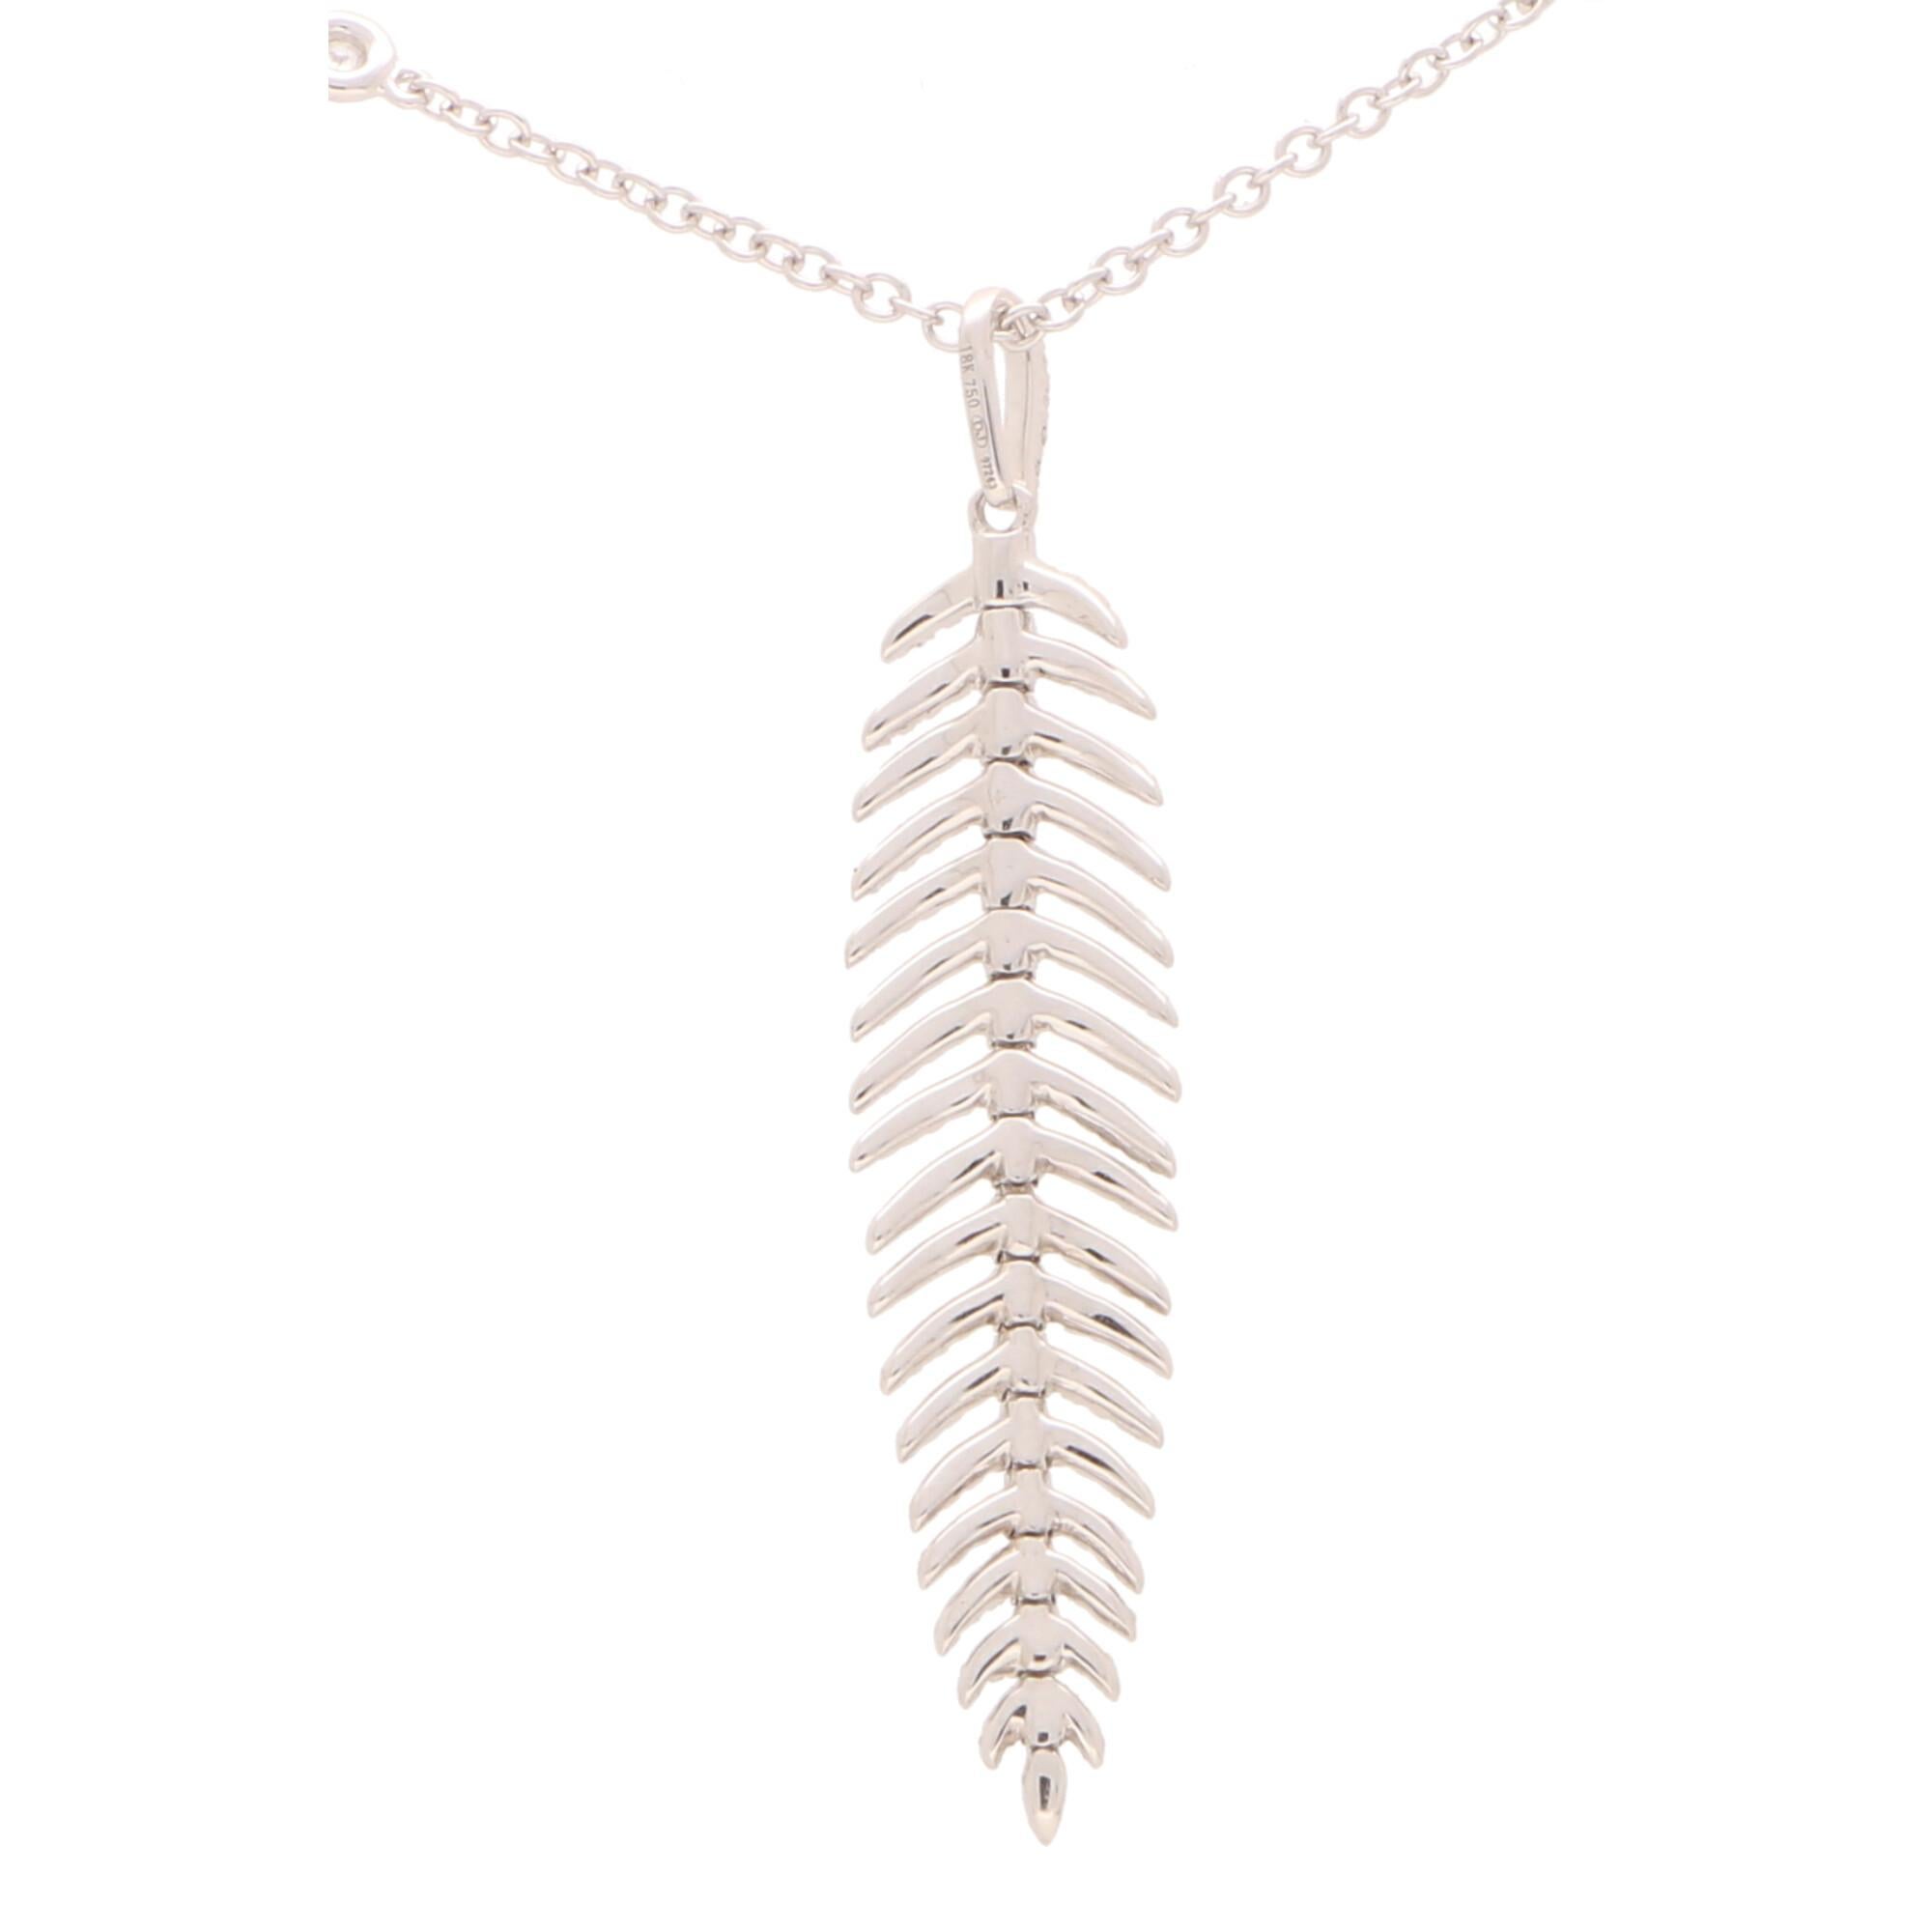 Modern Articulated Diamond Feather Necklace in 18 Karat White Gold